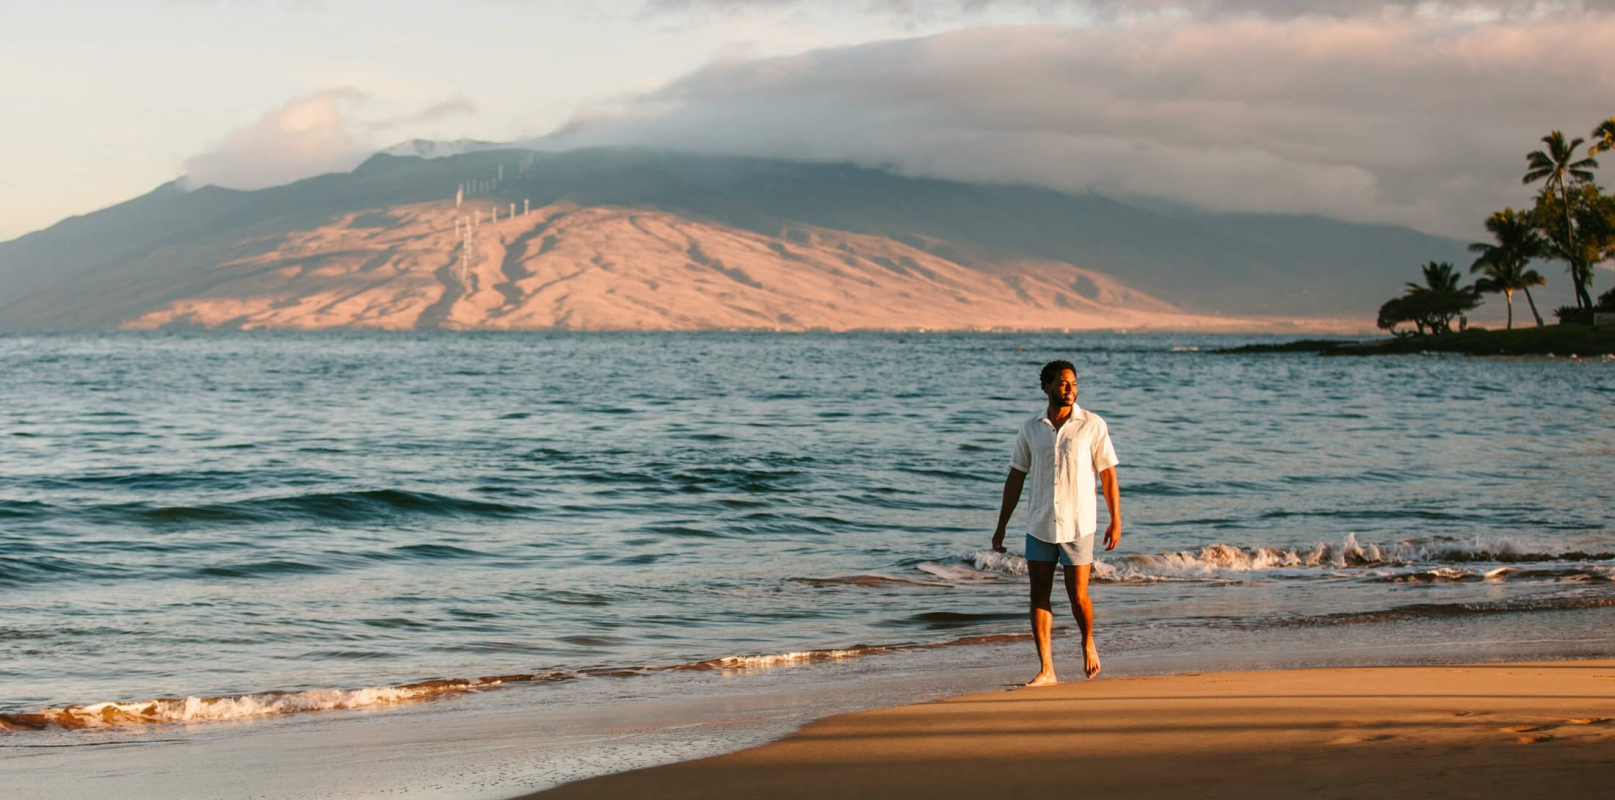 a person walks along the beach beside the ocean with mountains in the background